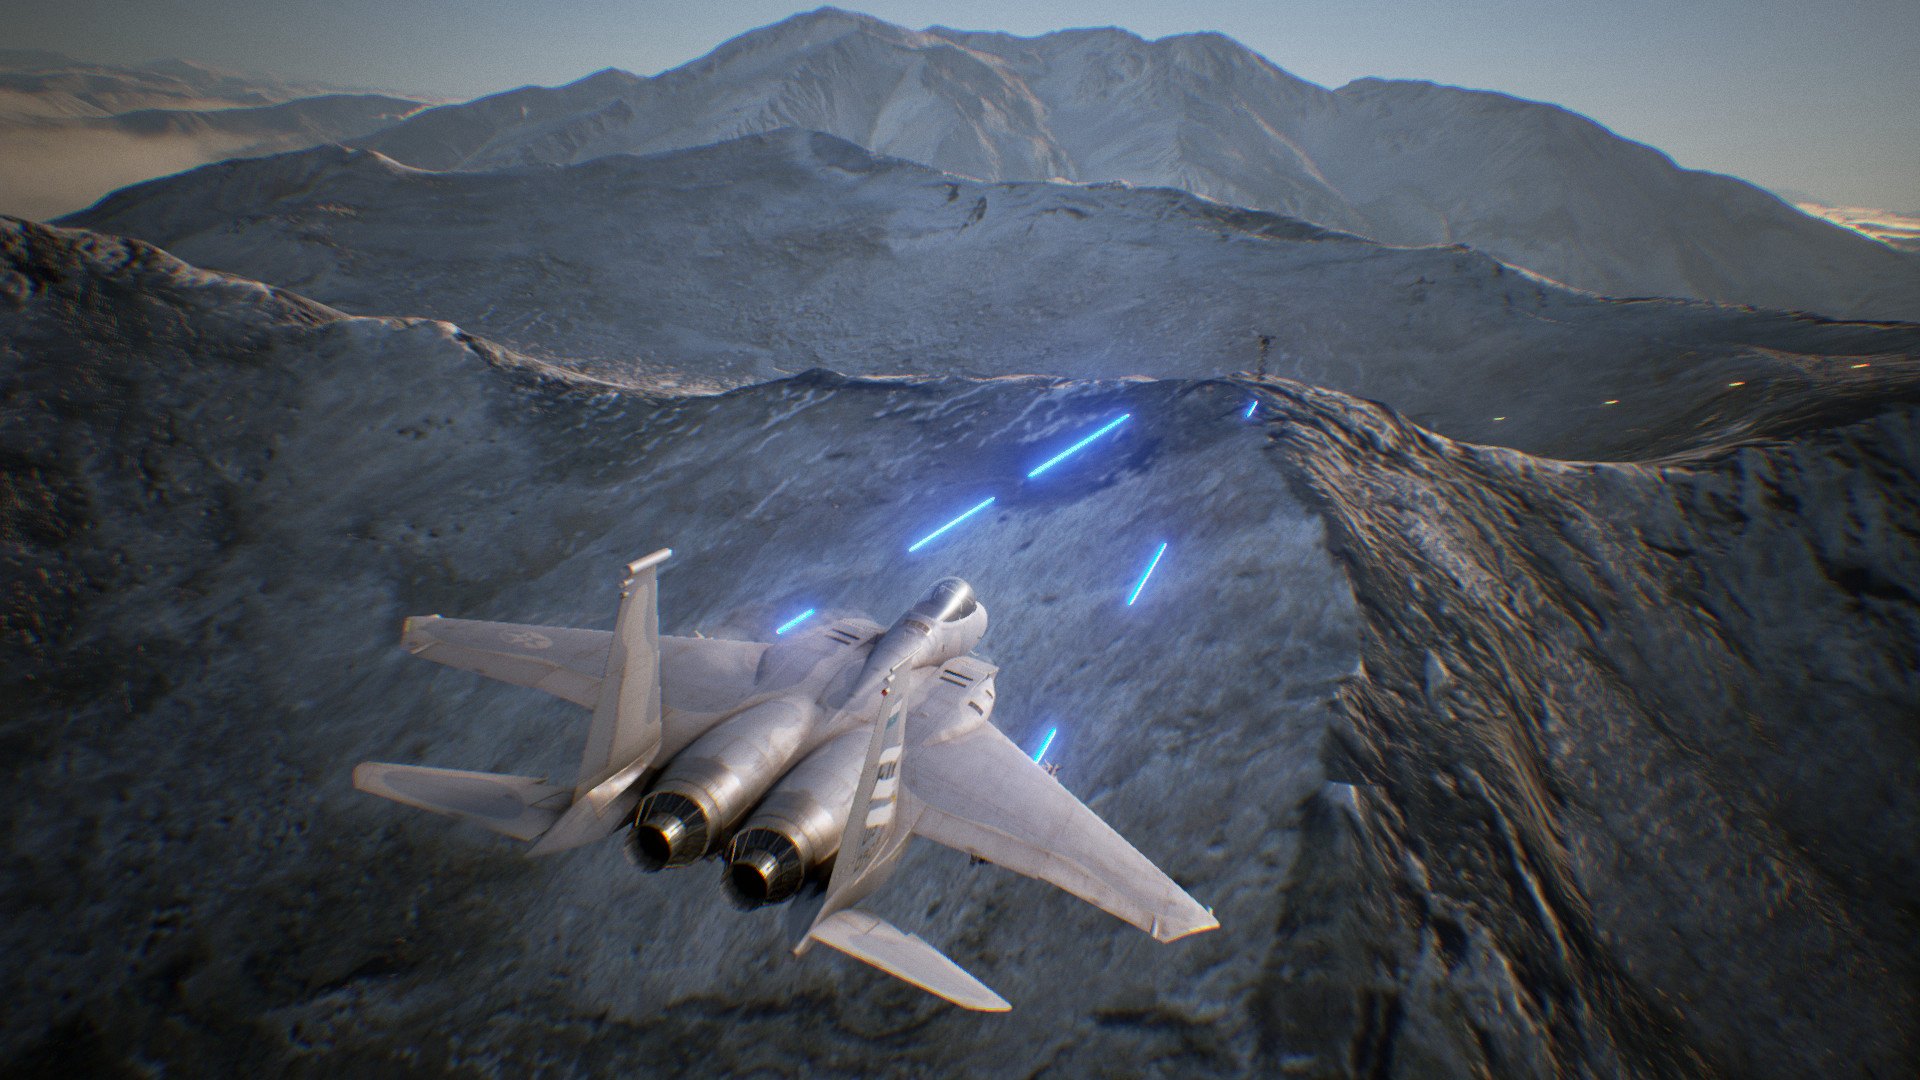 ACE COMBAT 7: SKIES UNKNOWN PlayStation 4 Account Pixelpuffin.net Activation Link